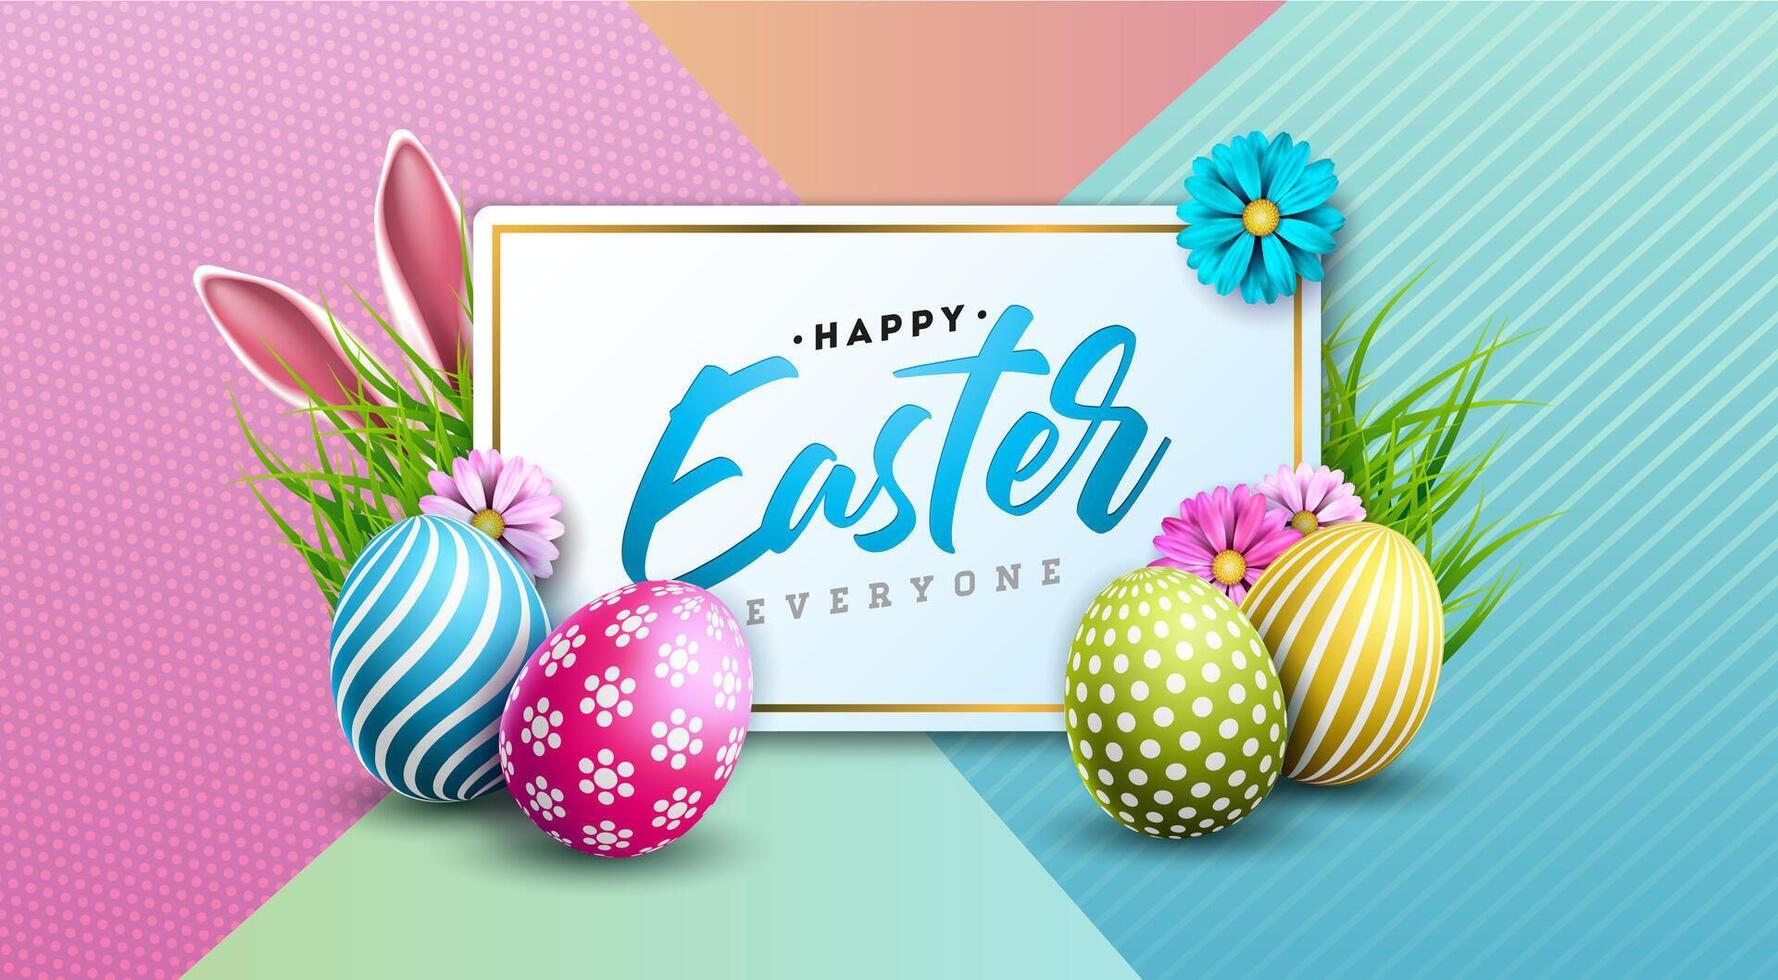 Vector Illustration of Happy Easter Holiday with Flower, Painted Egg and Rabbit Ears on Colorful Background. International Religious Celebration Design with Typography Letter for Greeting Card or